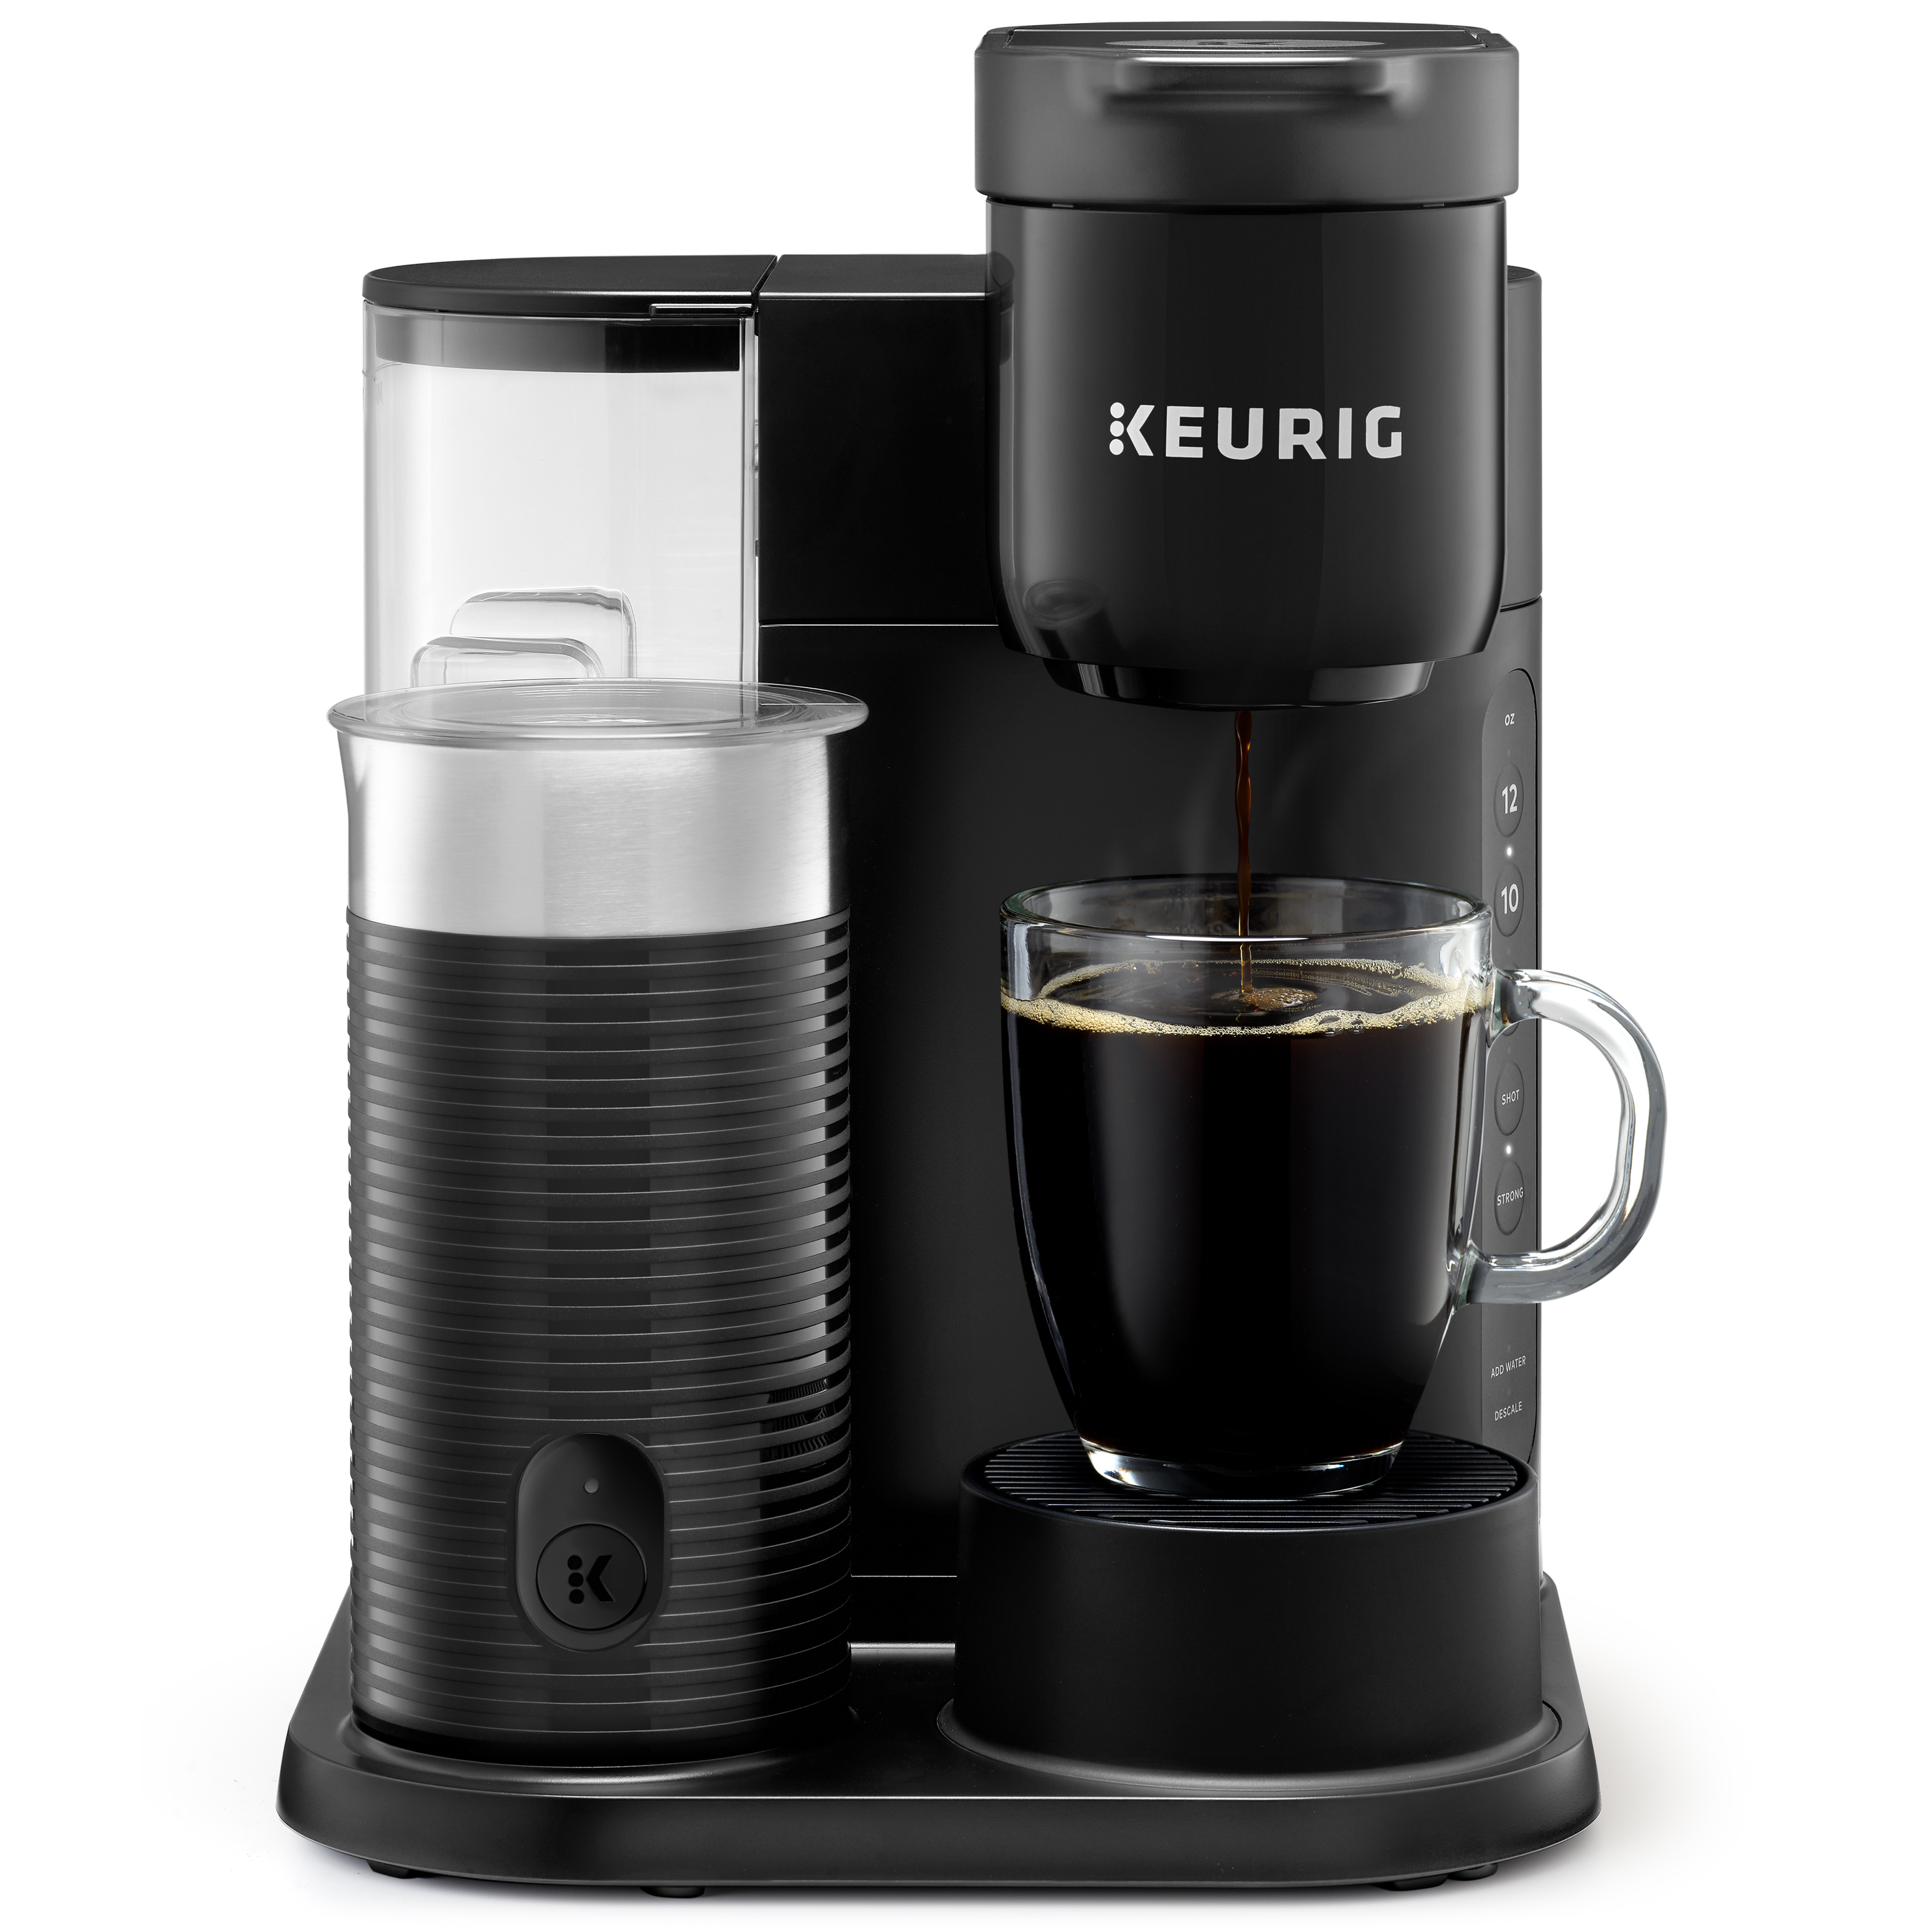 Keurig Support  Call 1-866-901-2739 or Email Us